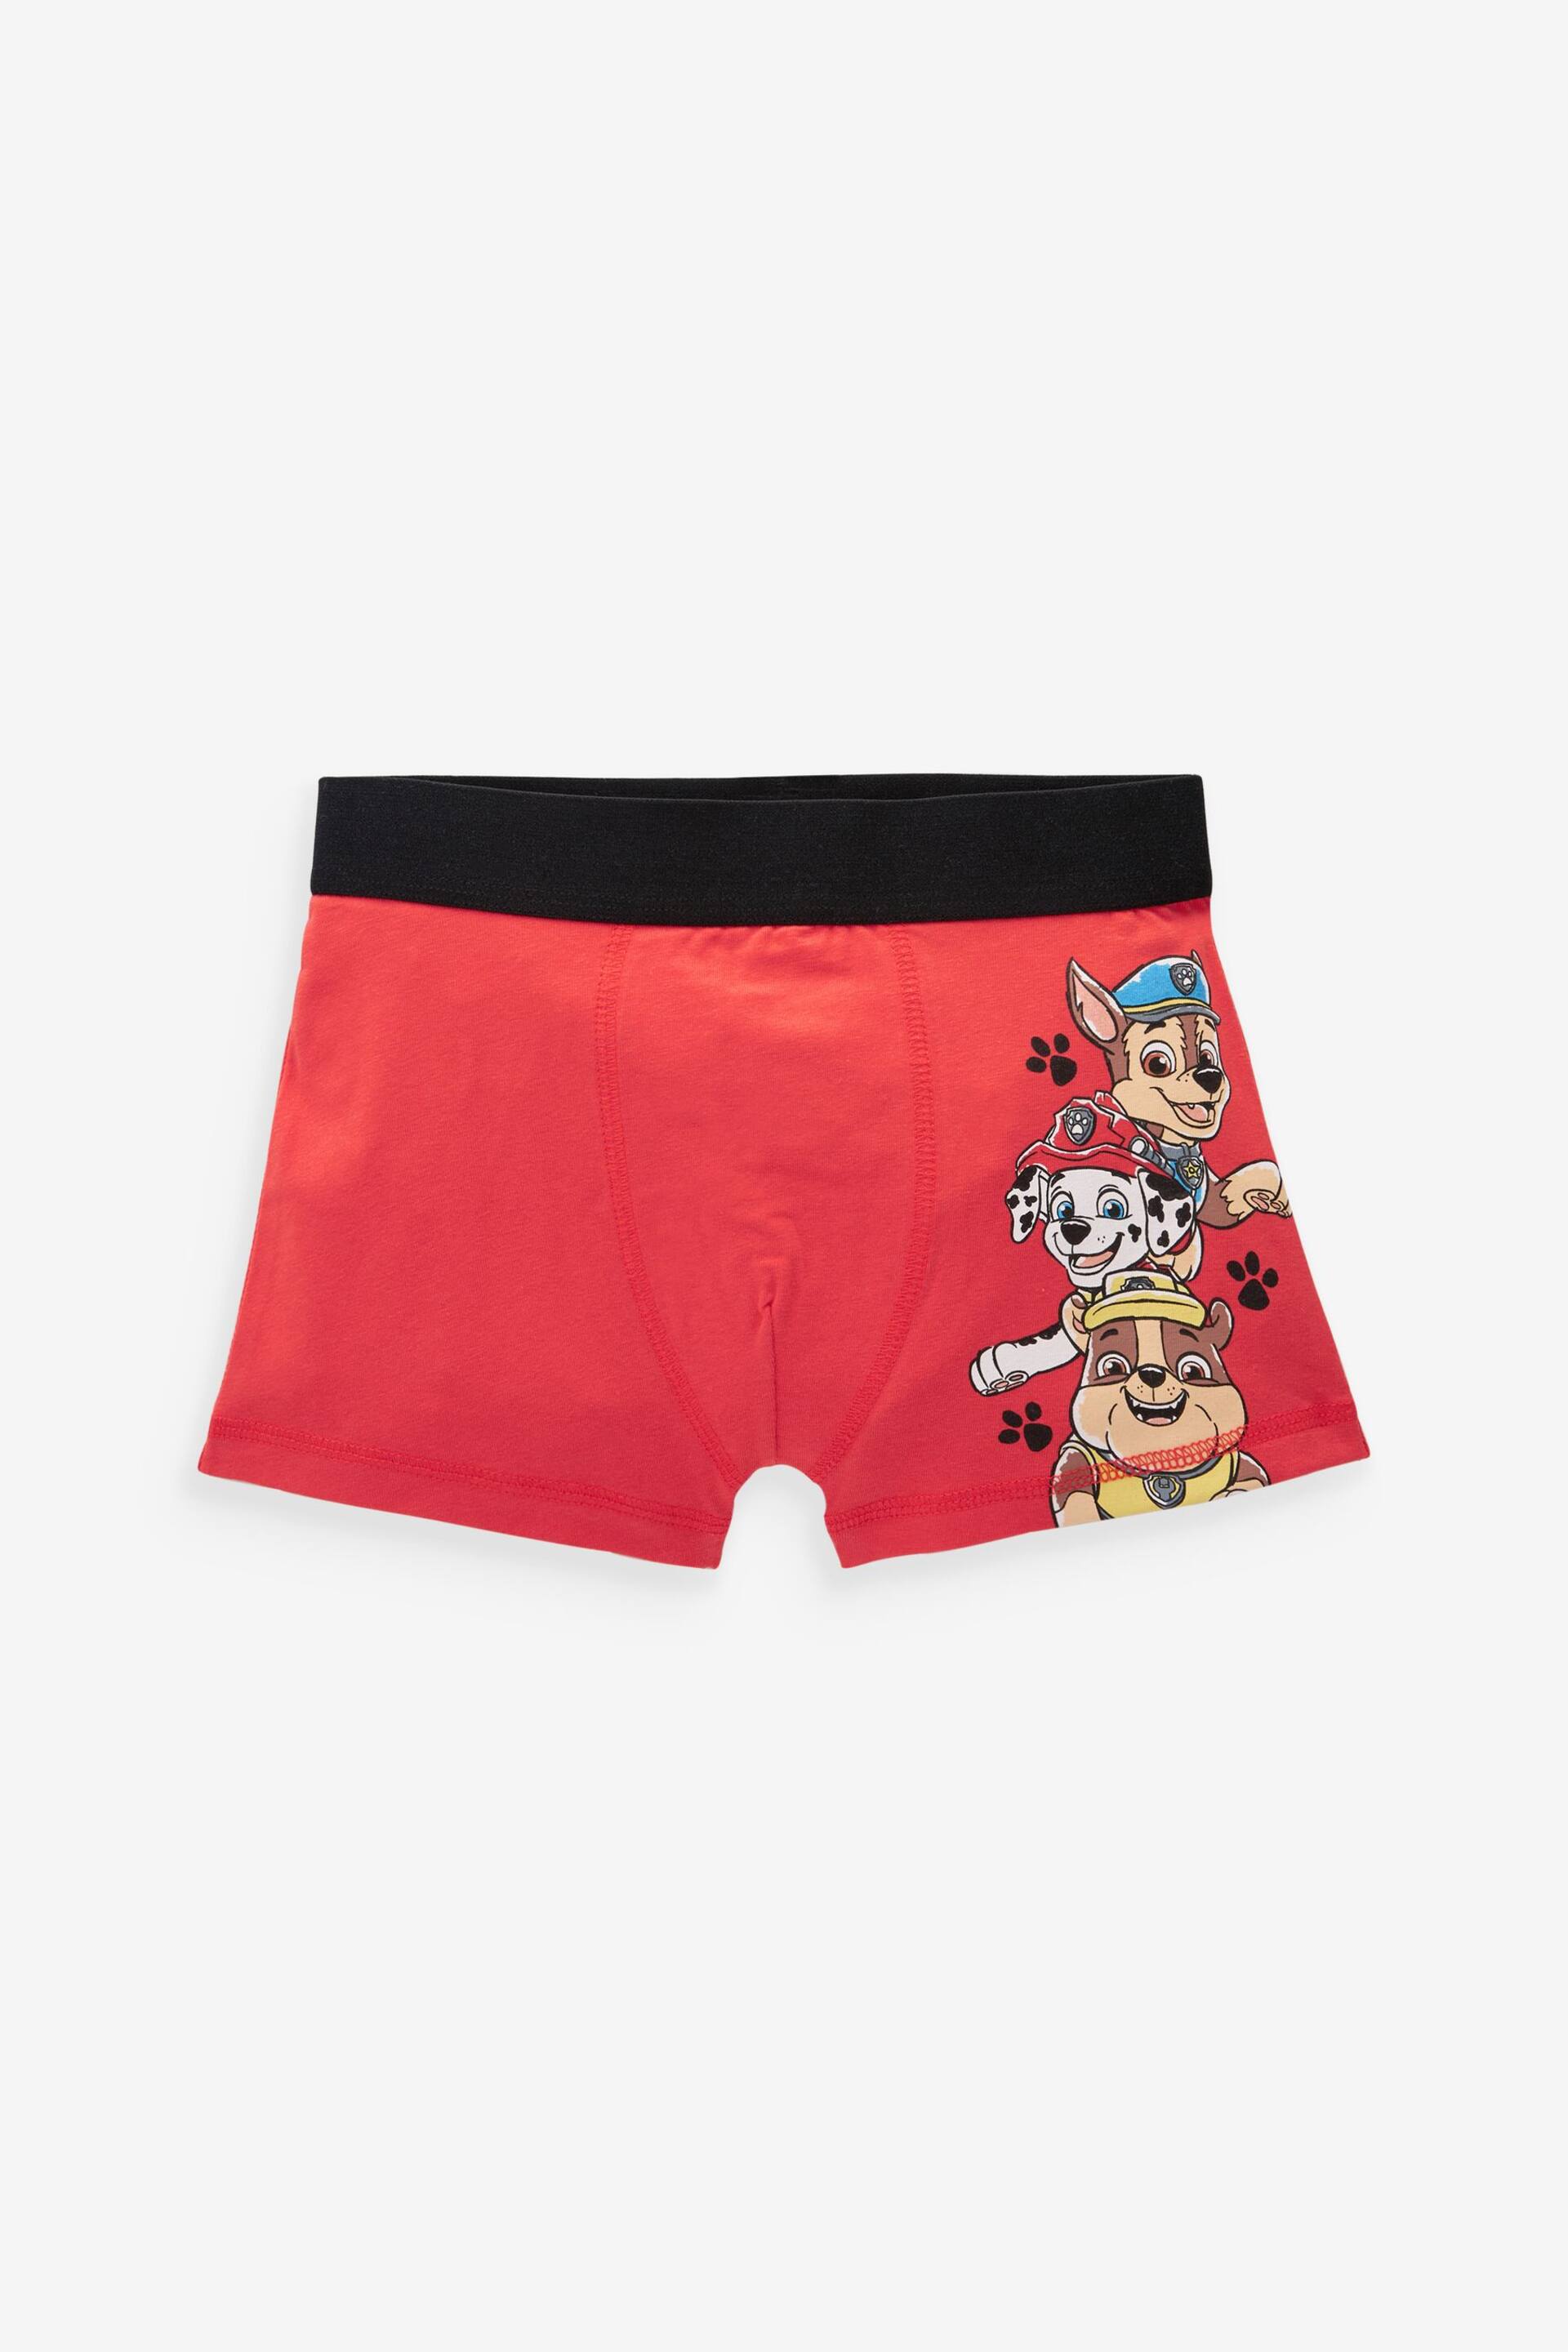 PAW Patrol License Trunks 3 Pack (1.5-14yrs) - Image 2 of 7